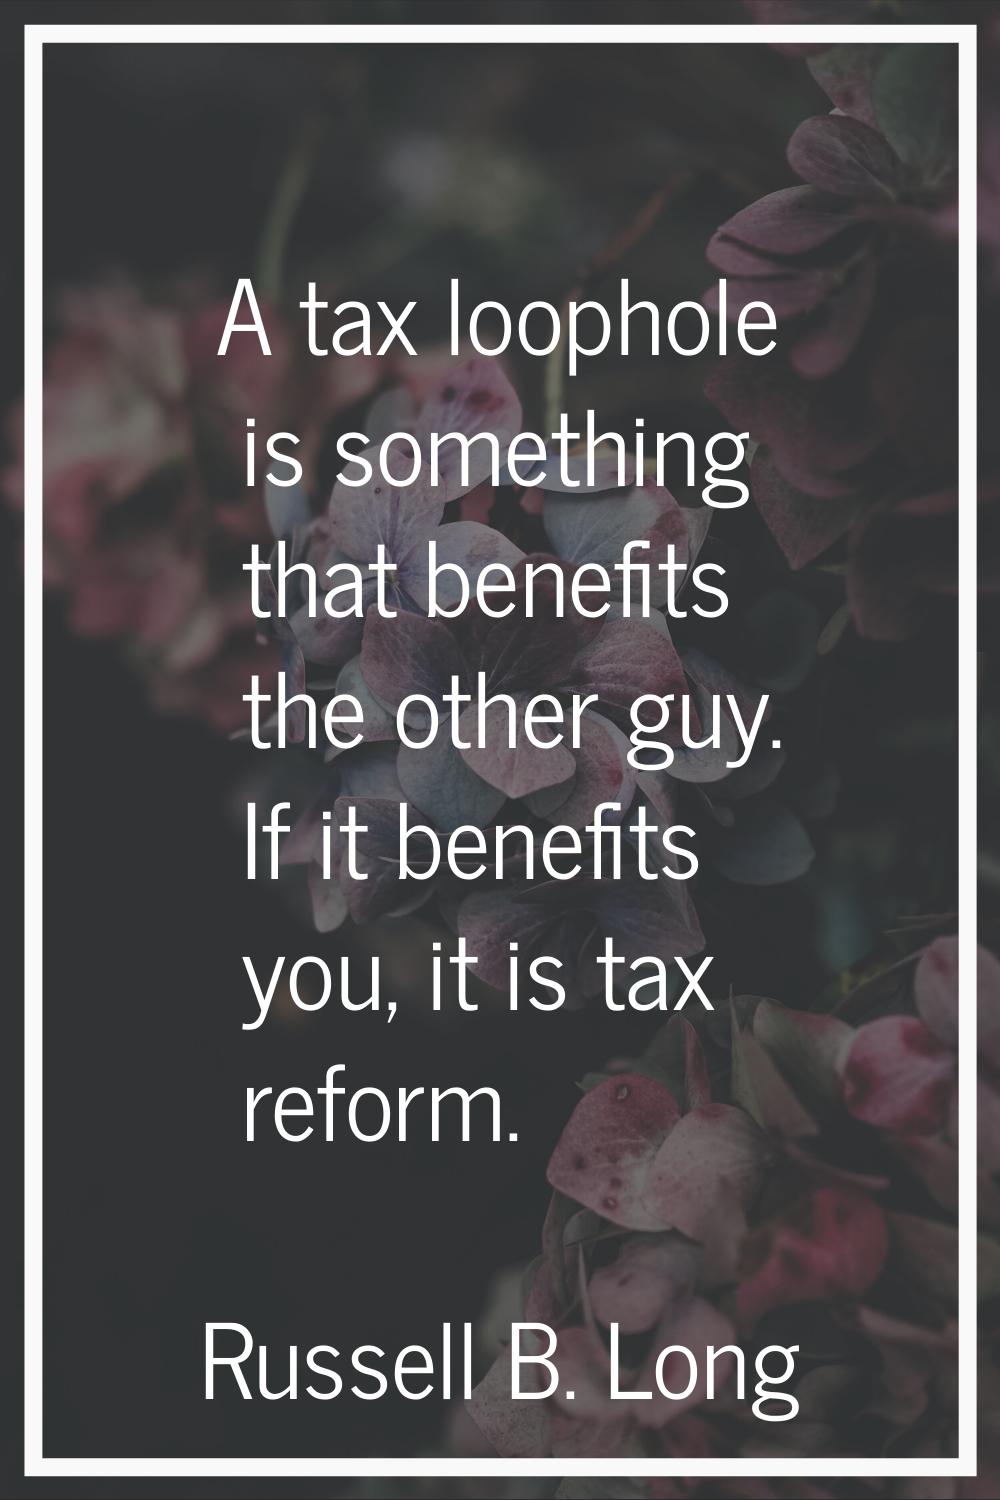 A tax loophole is something that benefits the other guy. If it benefits you, it is tax reform.